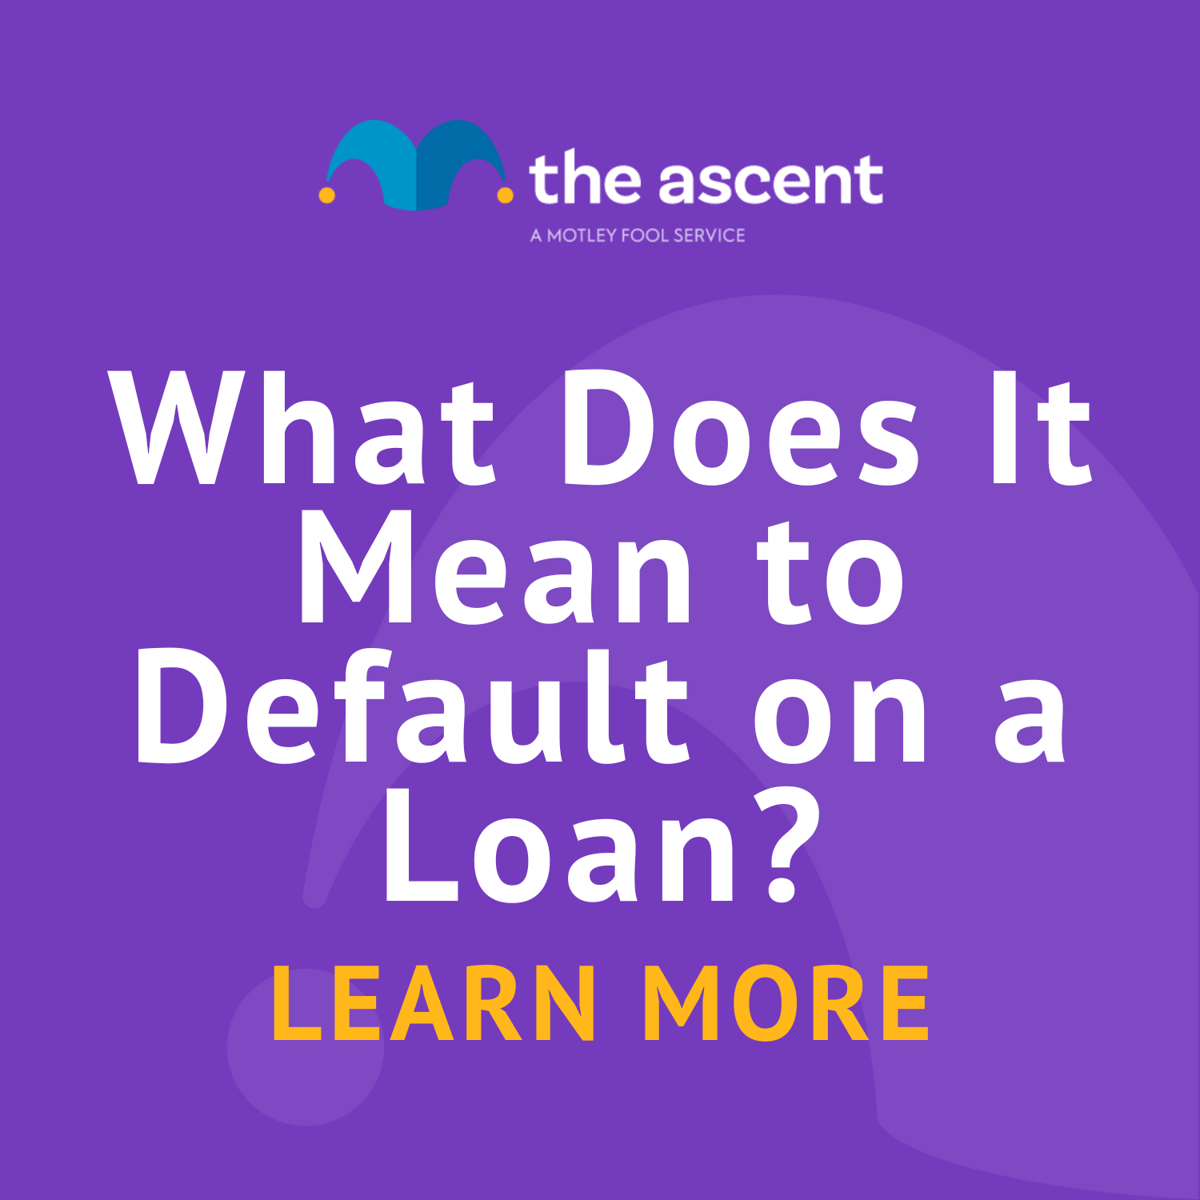 What Does It Mean to Default on a Loan?